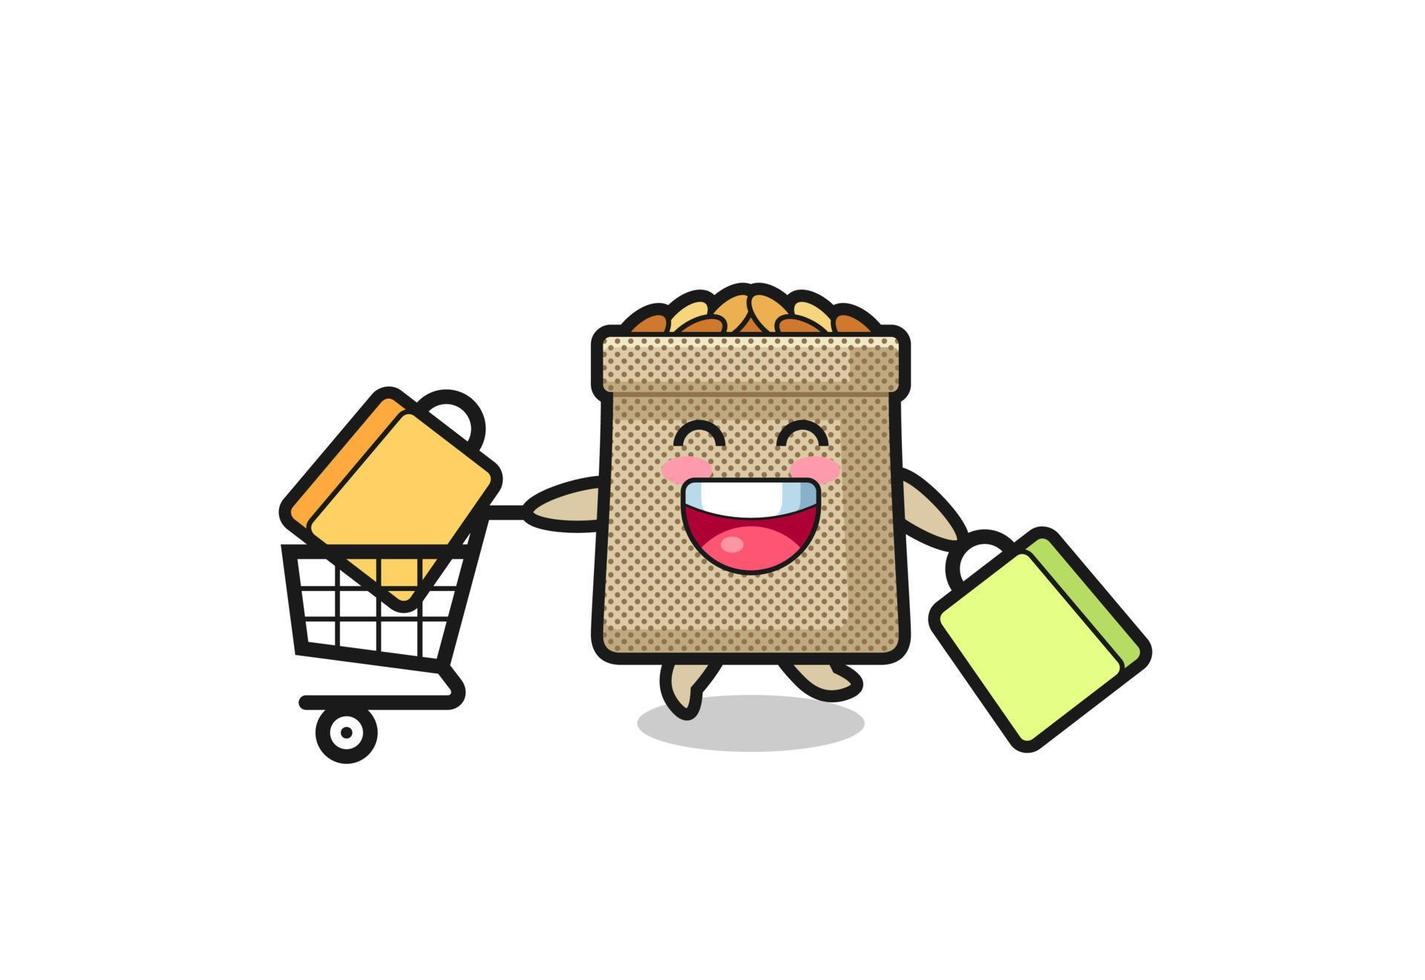 black Friday illustration with cute wheat sack mascot vector